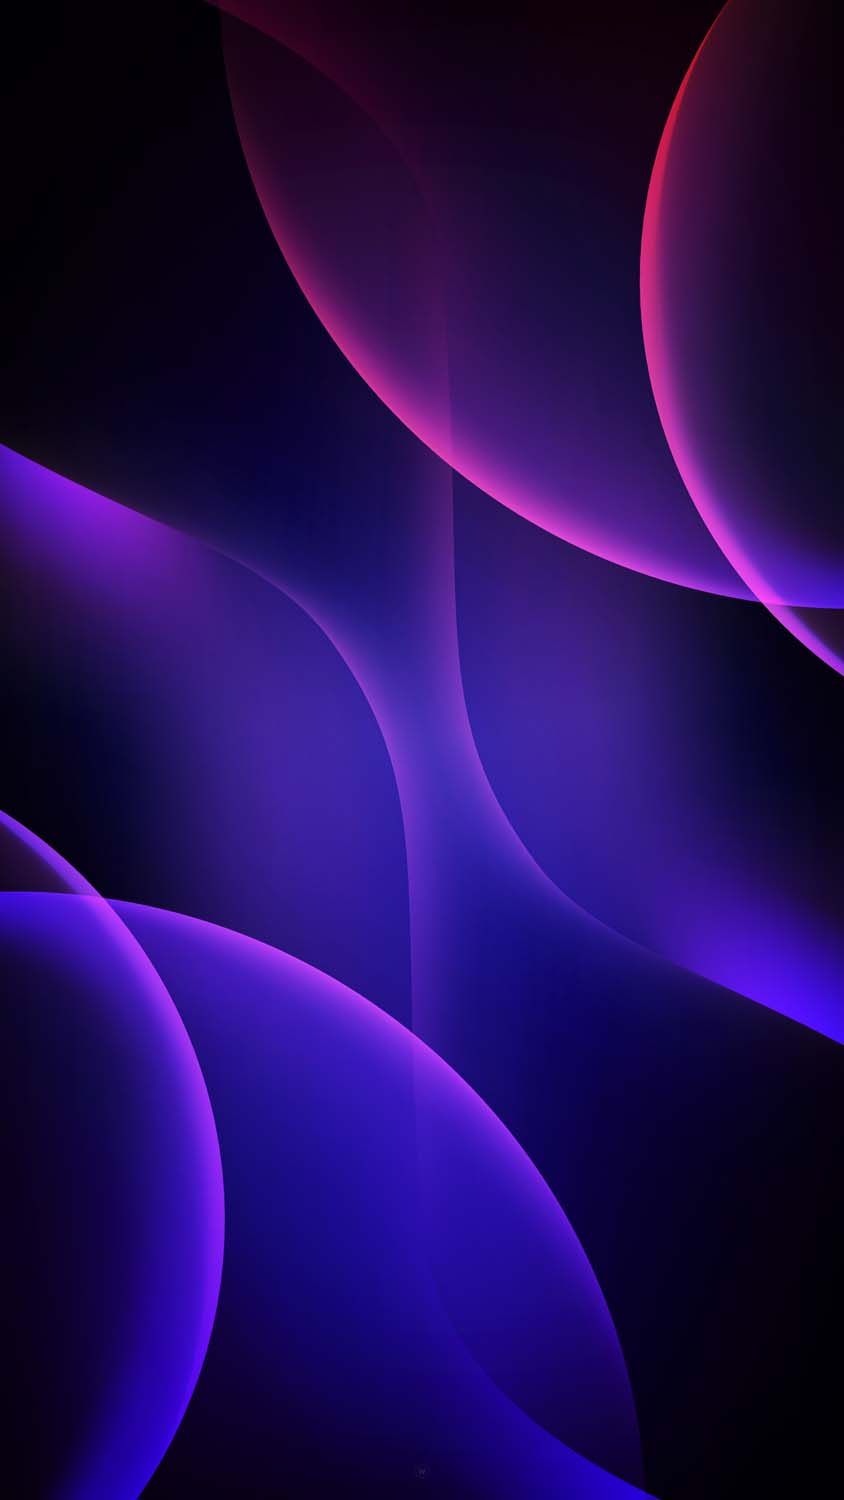 Blue Waves Abstract IPhone Wallpaper HD - IPhone Wallpapers : iPhone  Wallpapers